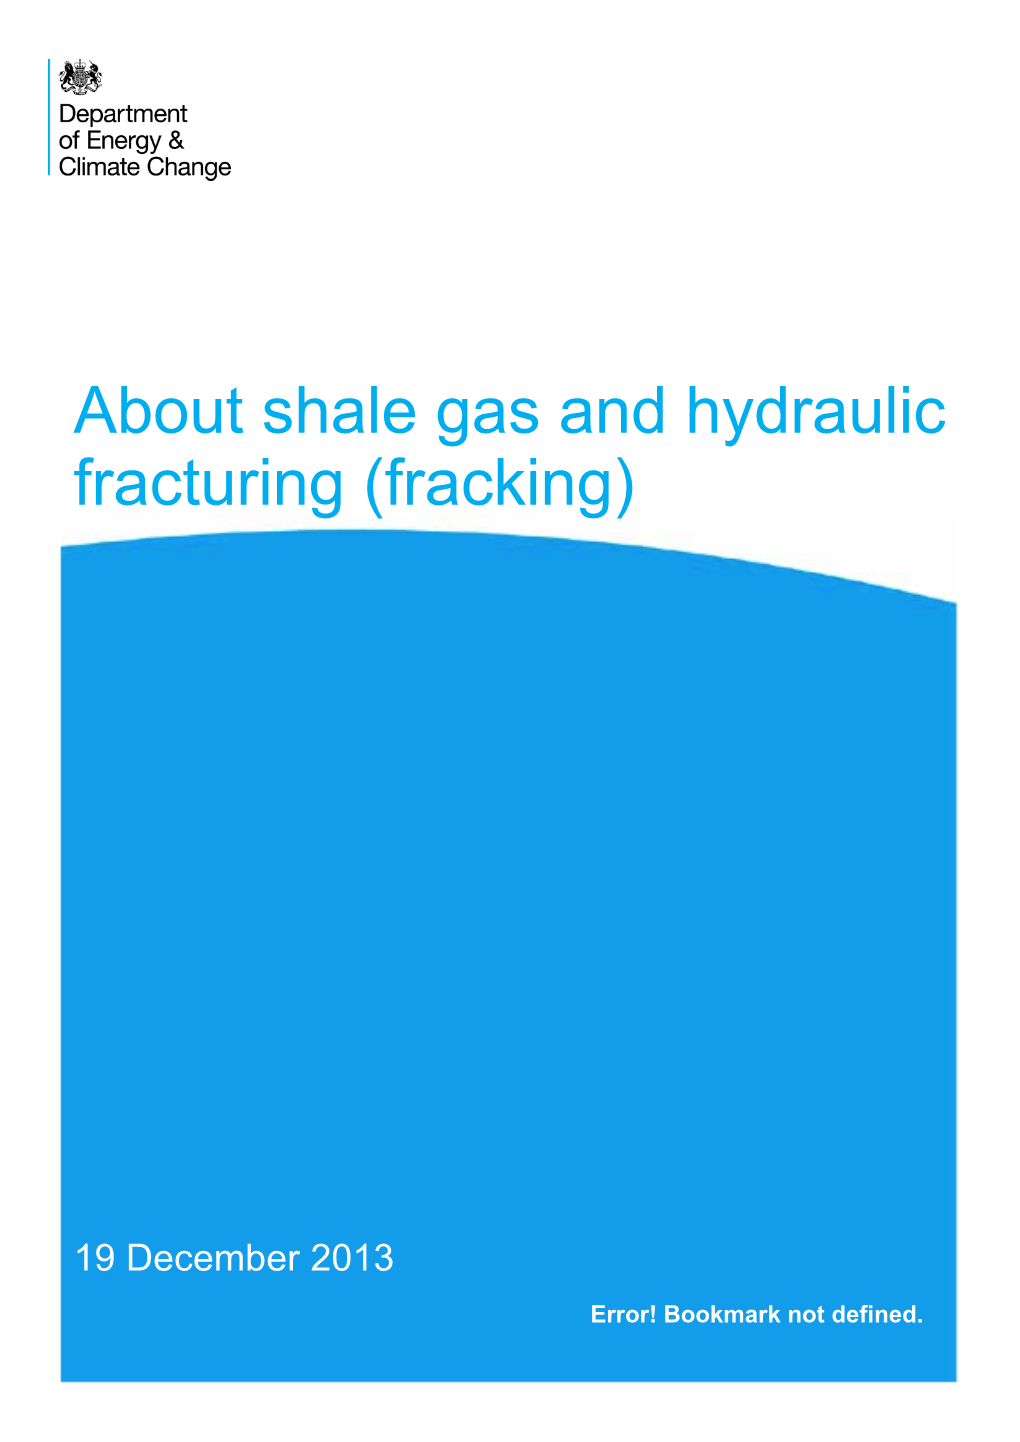 About Shale Gas and Hydraulic Fracturing (Fracking)